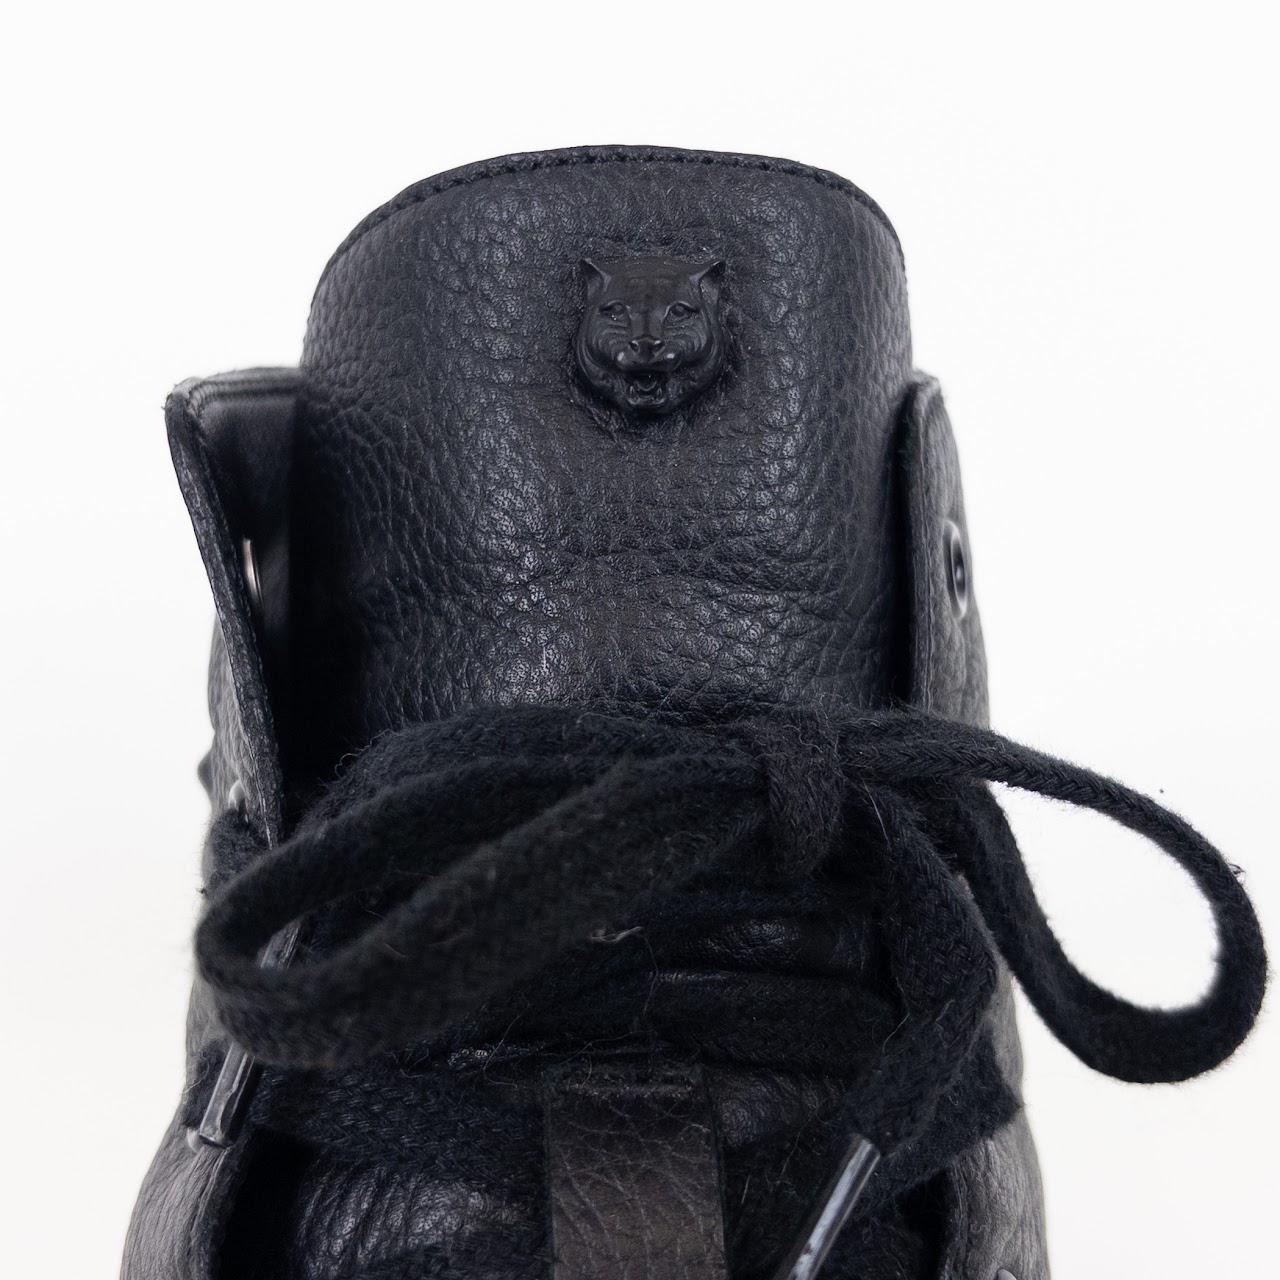 Gucci GG Leather Snake Embossed High Top Sneakers